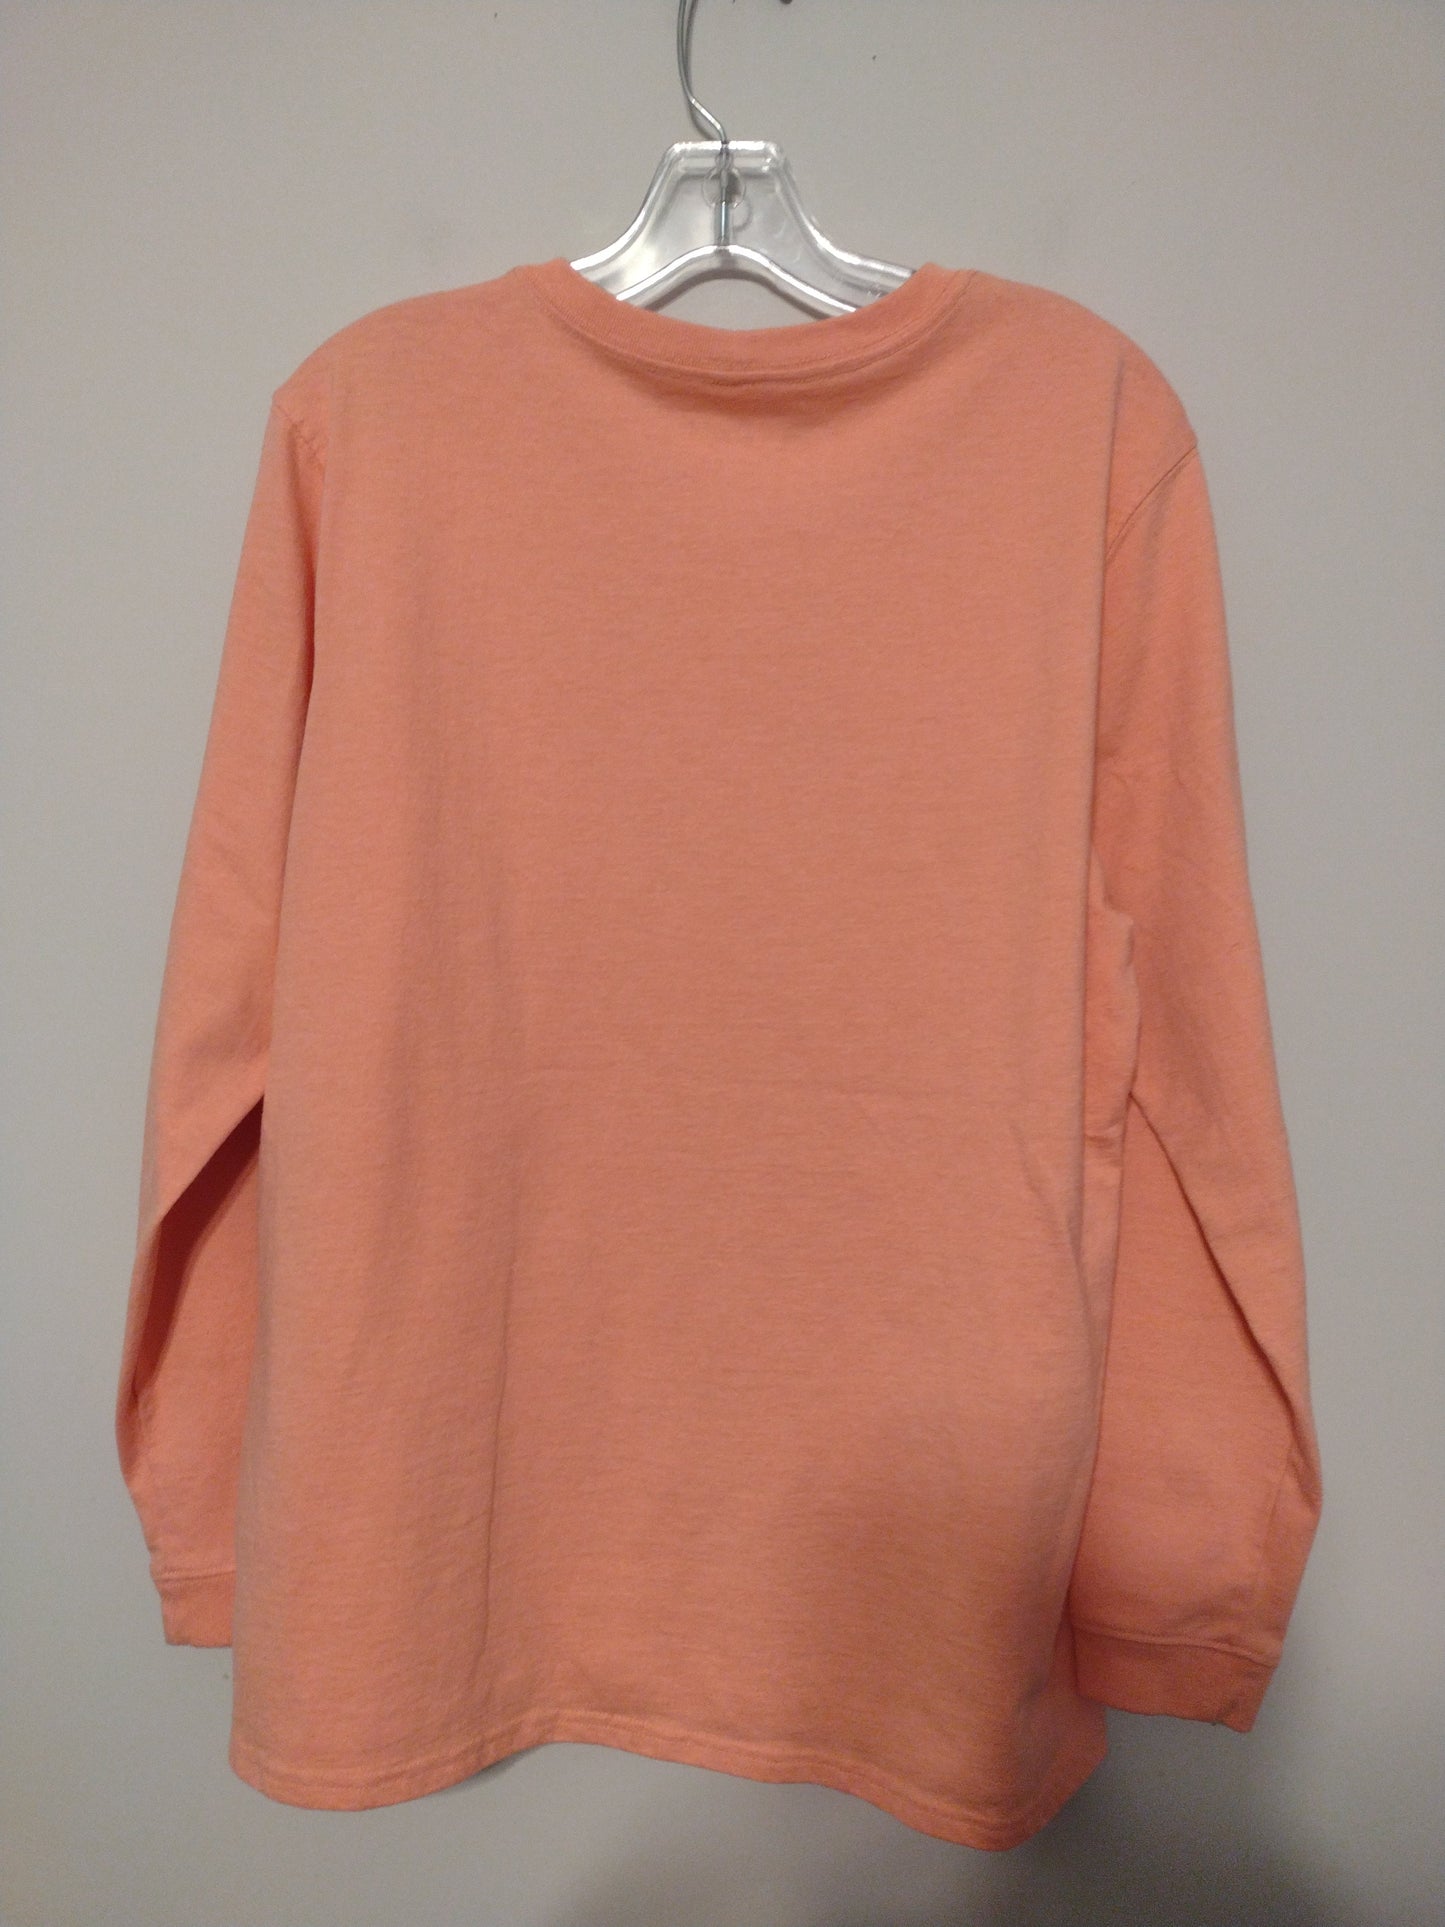 Top Long Sleeve By Carhart  Size: L